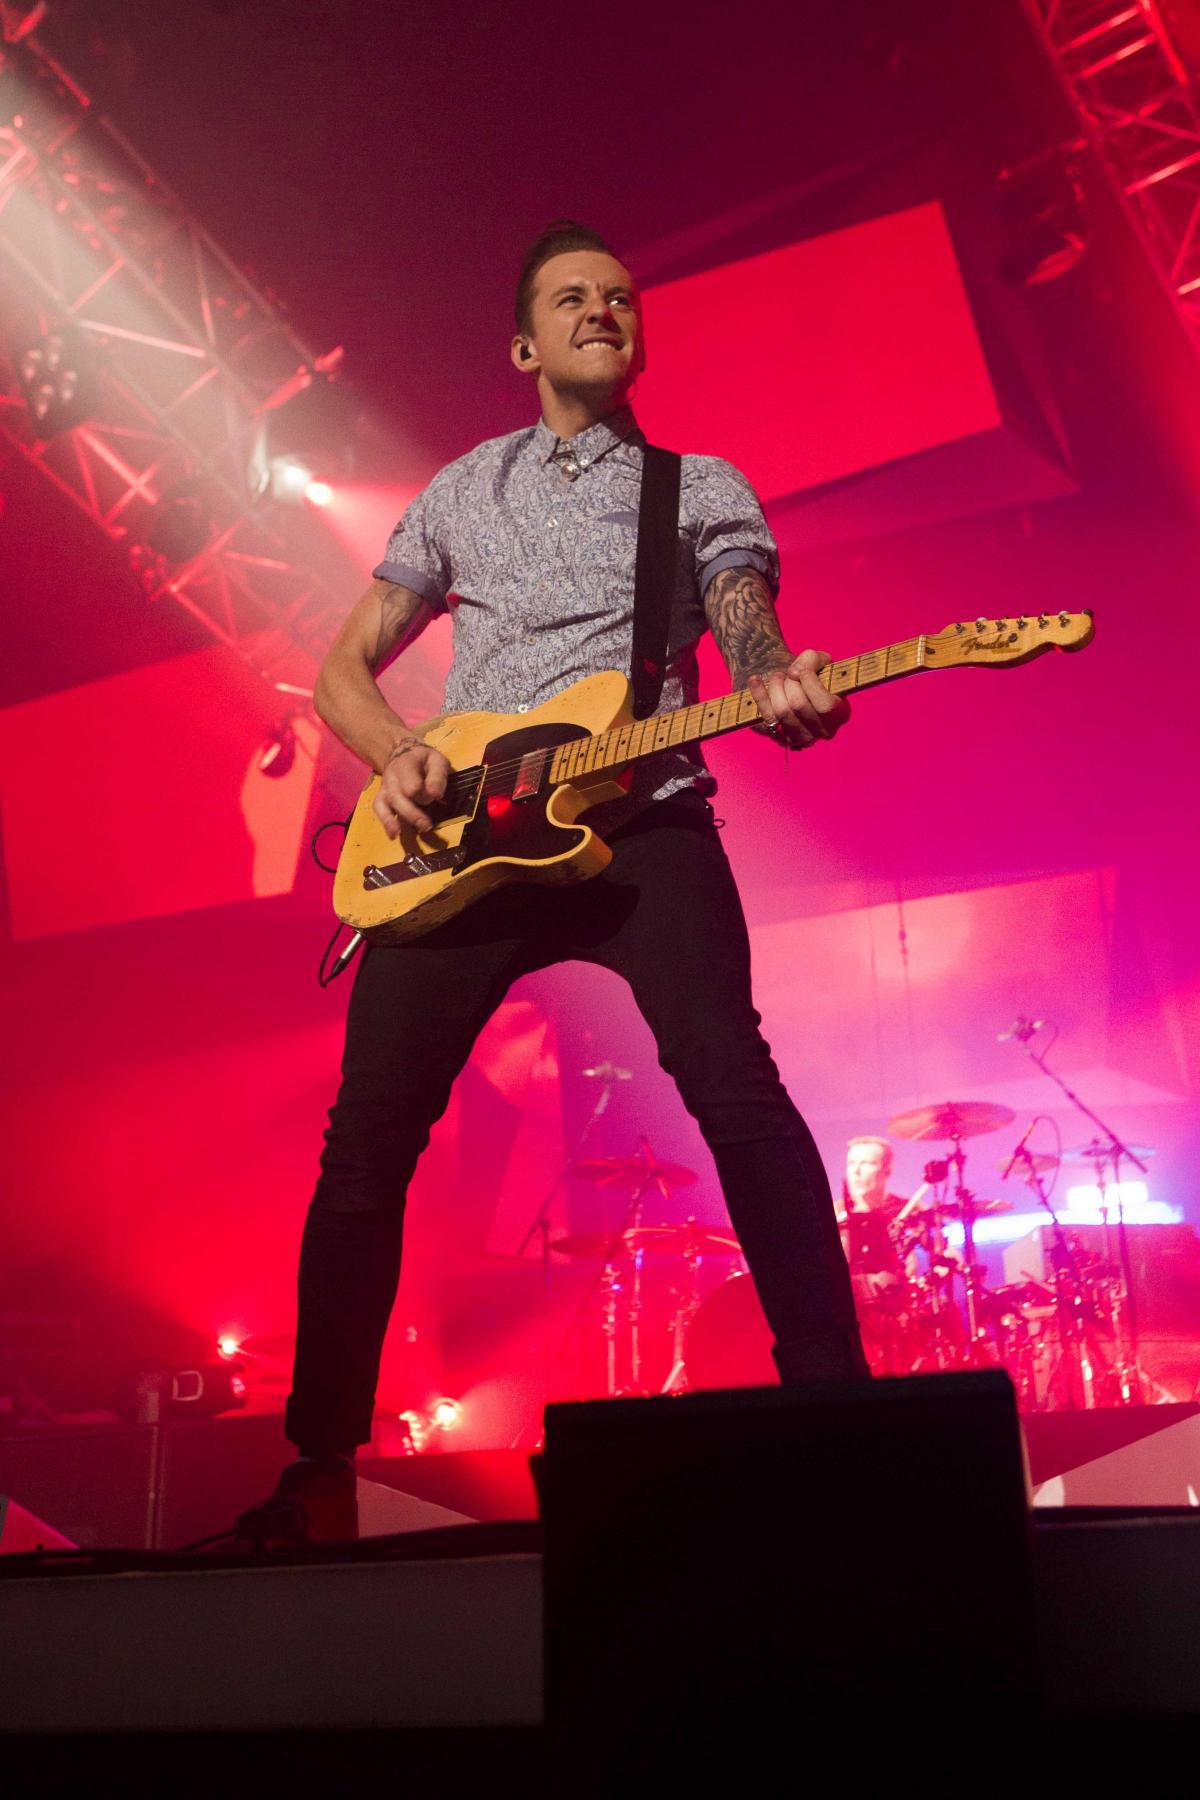 McBusted at the BIC. Pictures by www.rockstarimages.co.uk.